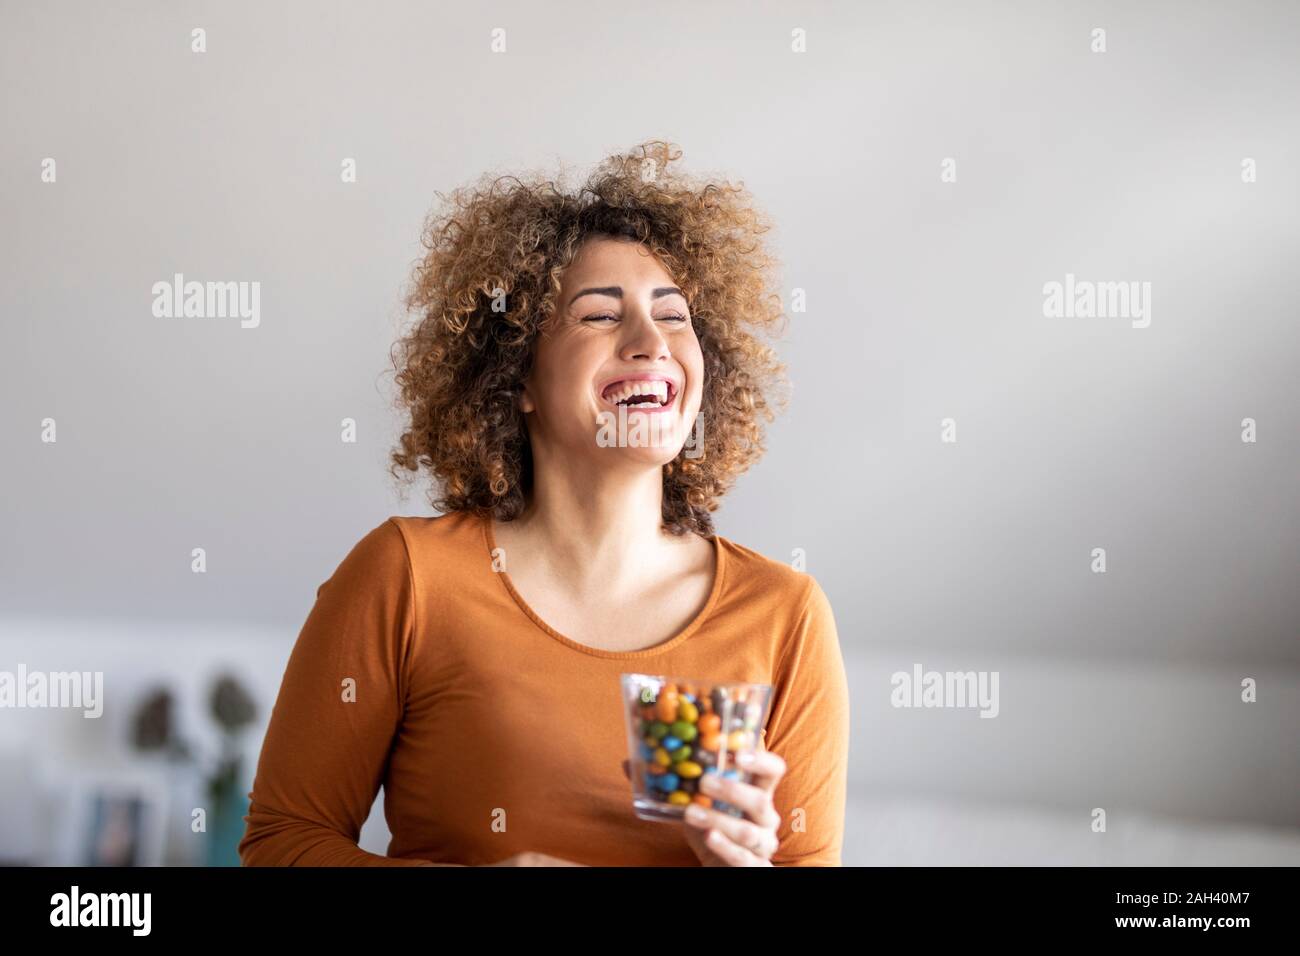 Smiling mid adult woman eating a cookie Stock Photo